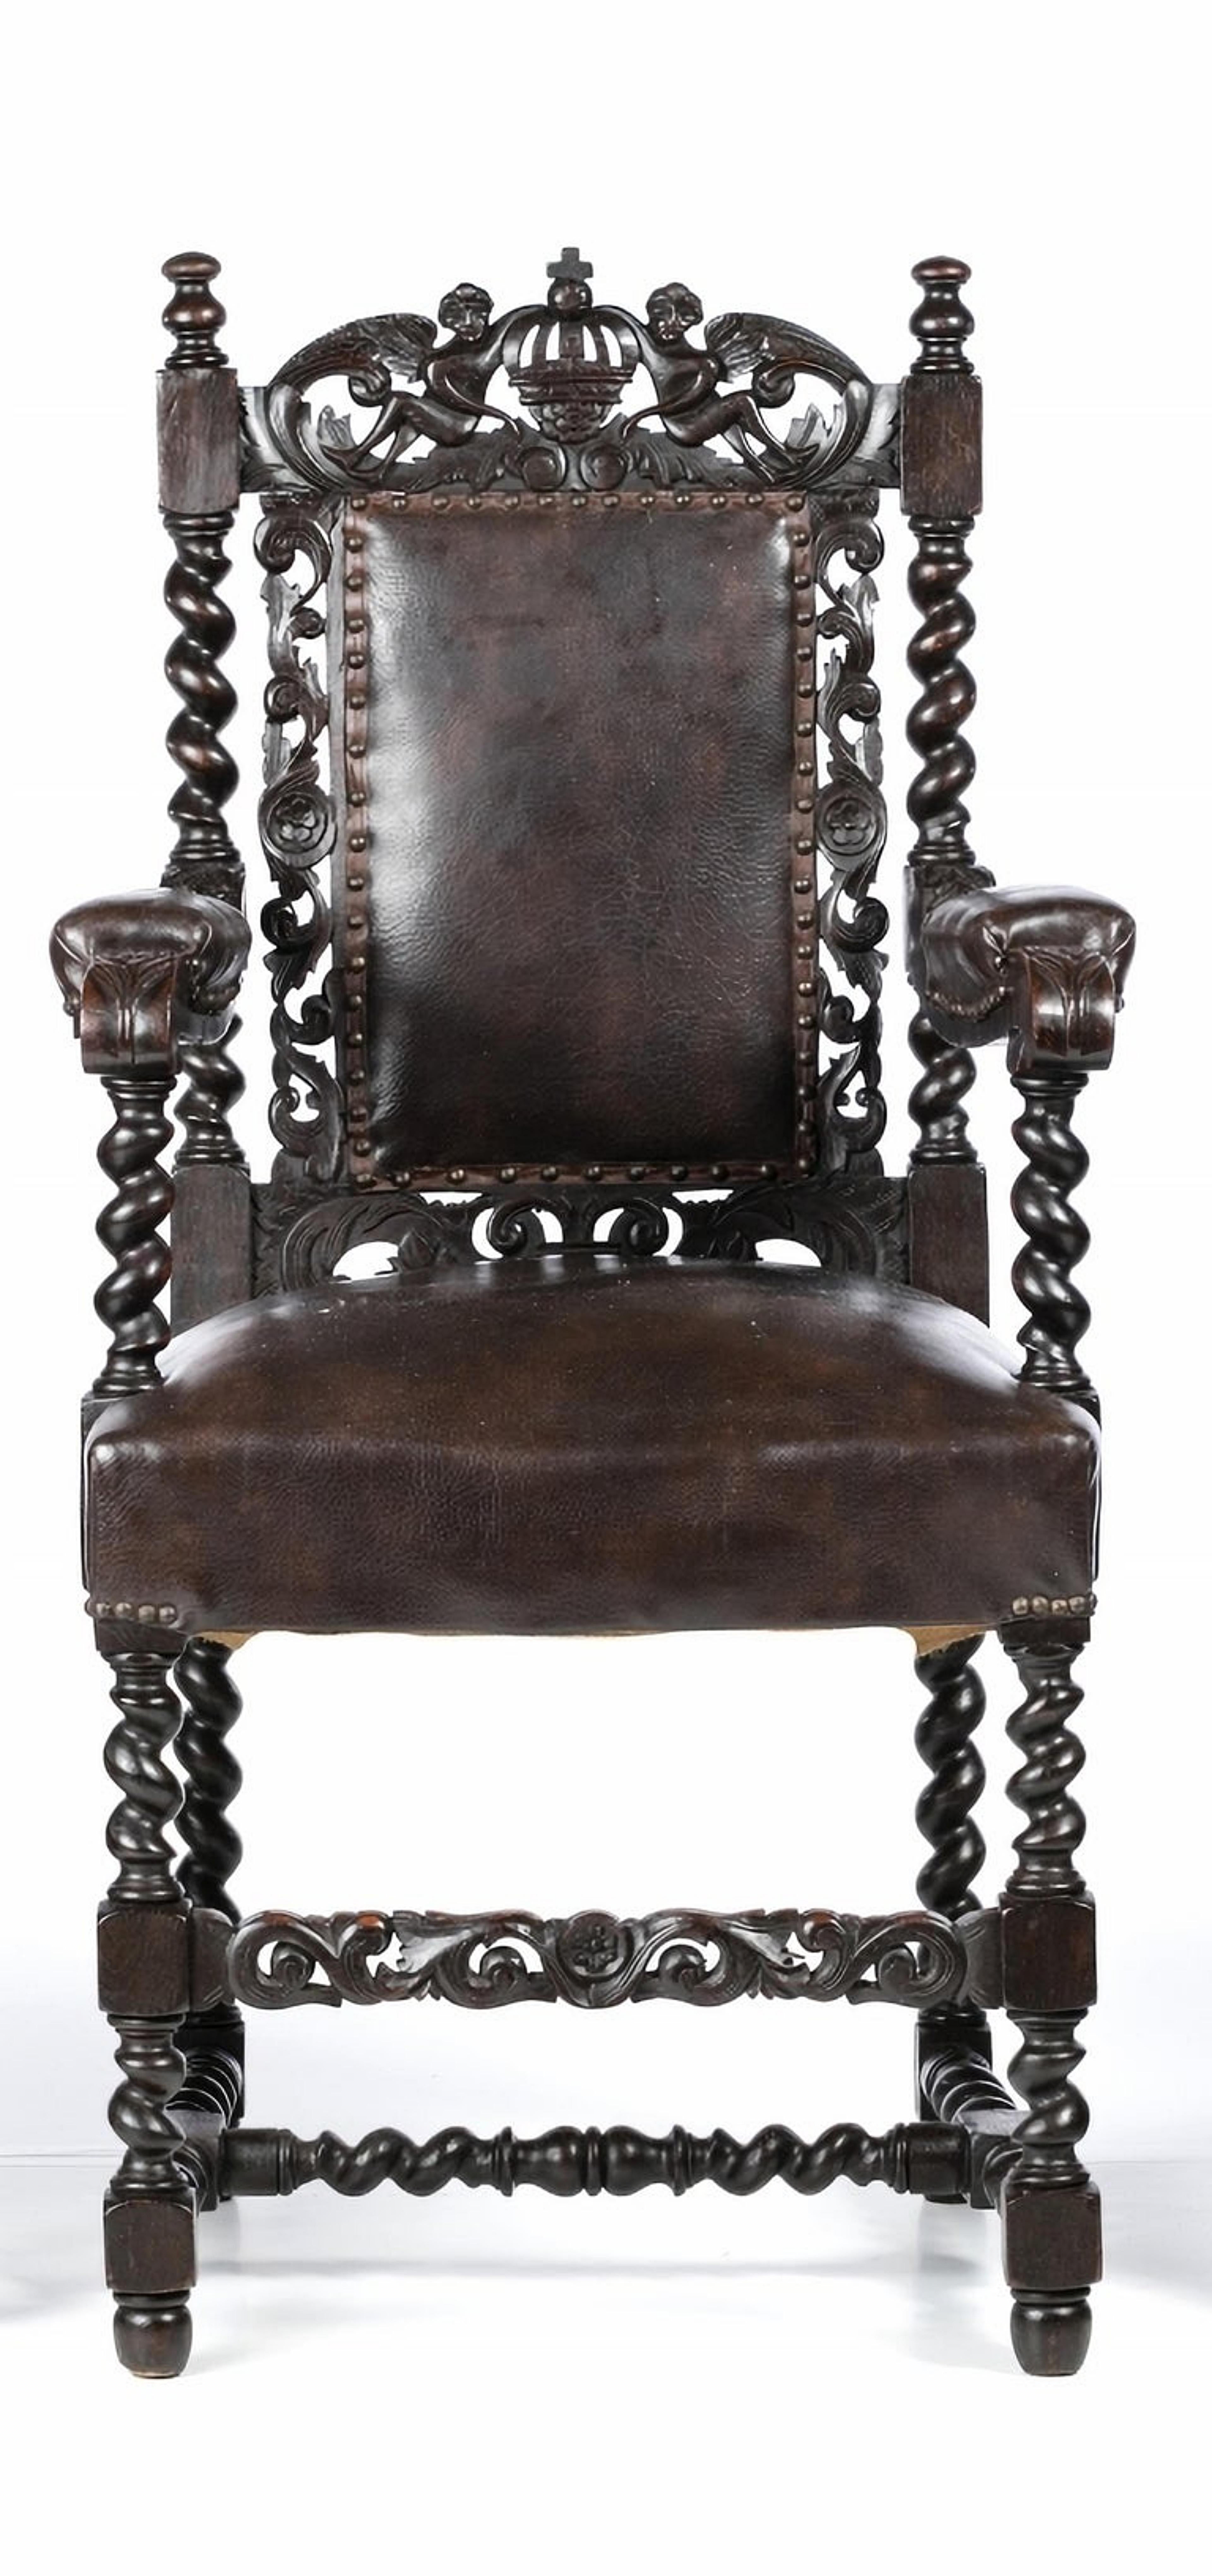 Armchair and pair of Ecclesiastical chairs
19th Century
Portuguese
in carved brown.
Leather seat and back.
Dim.: 111 x 57 x 50 cm.

THE PRICE IS FOR THE SET